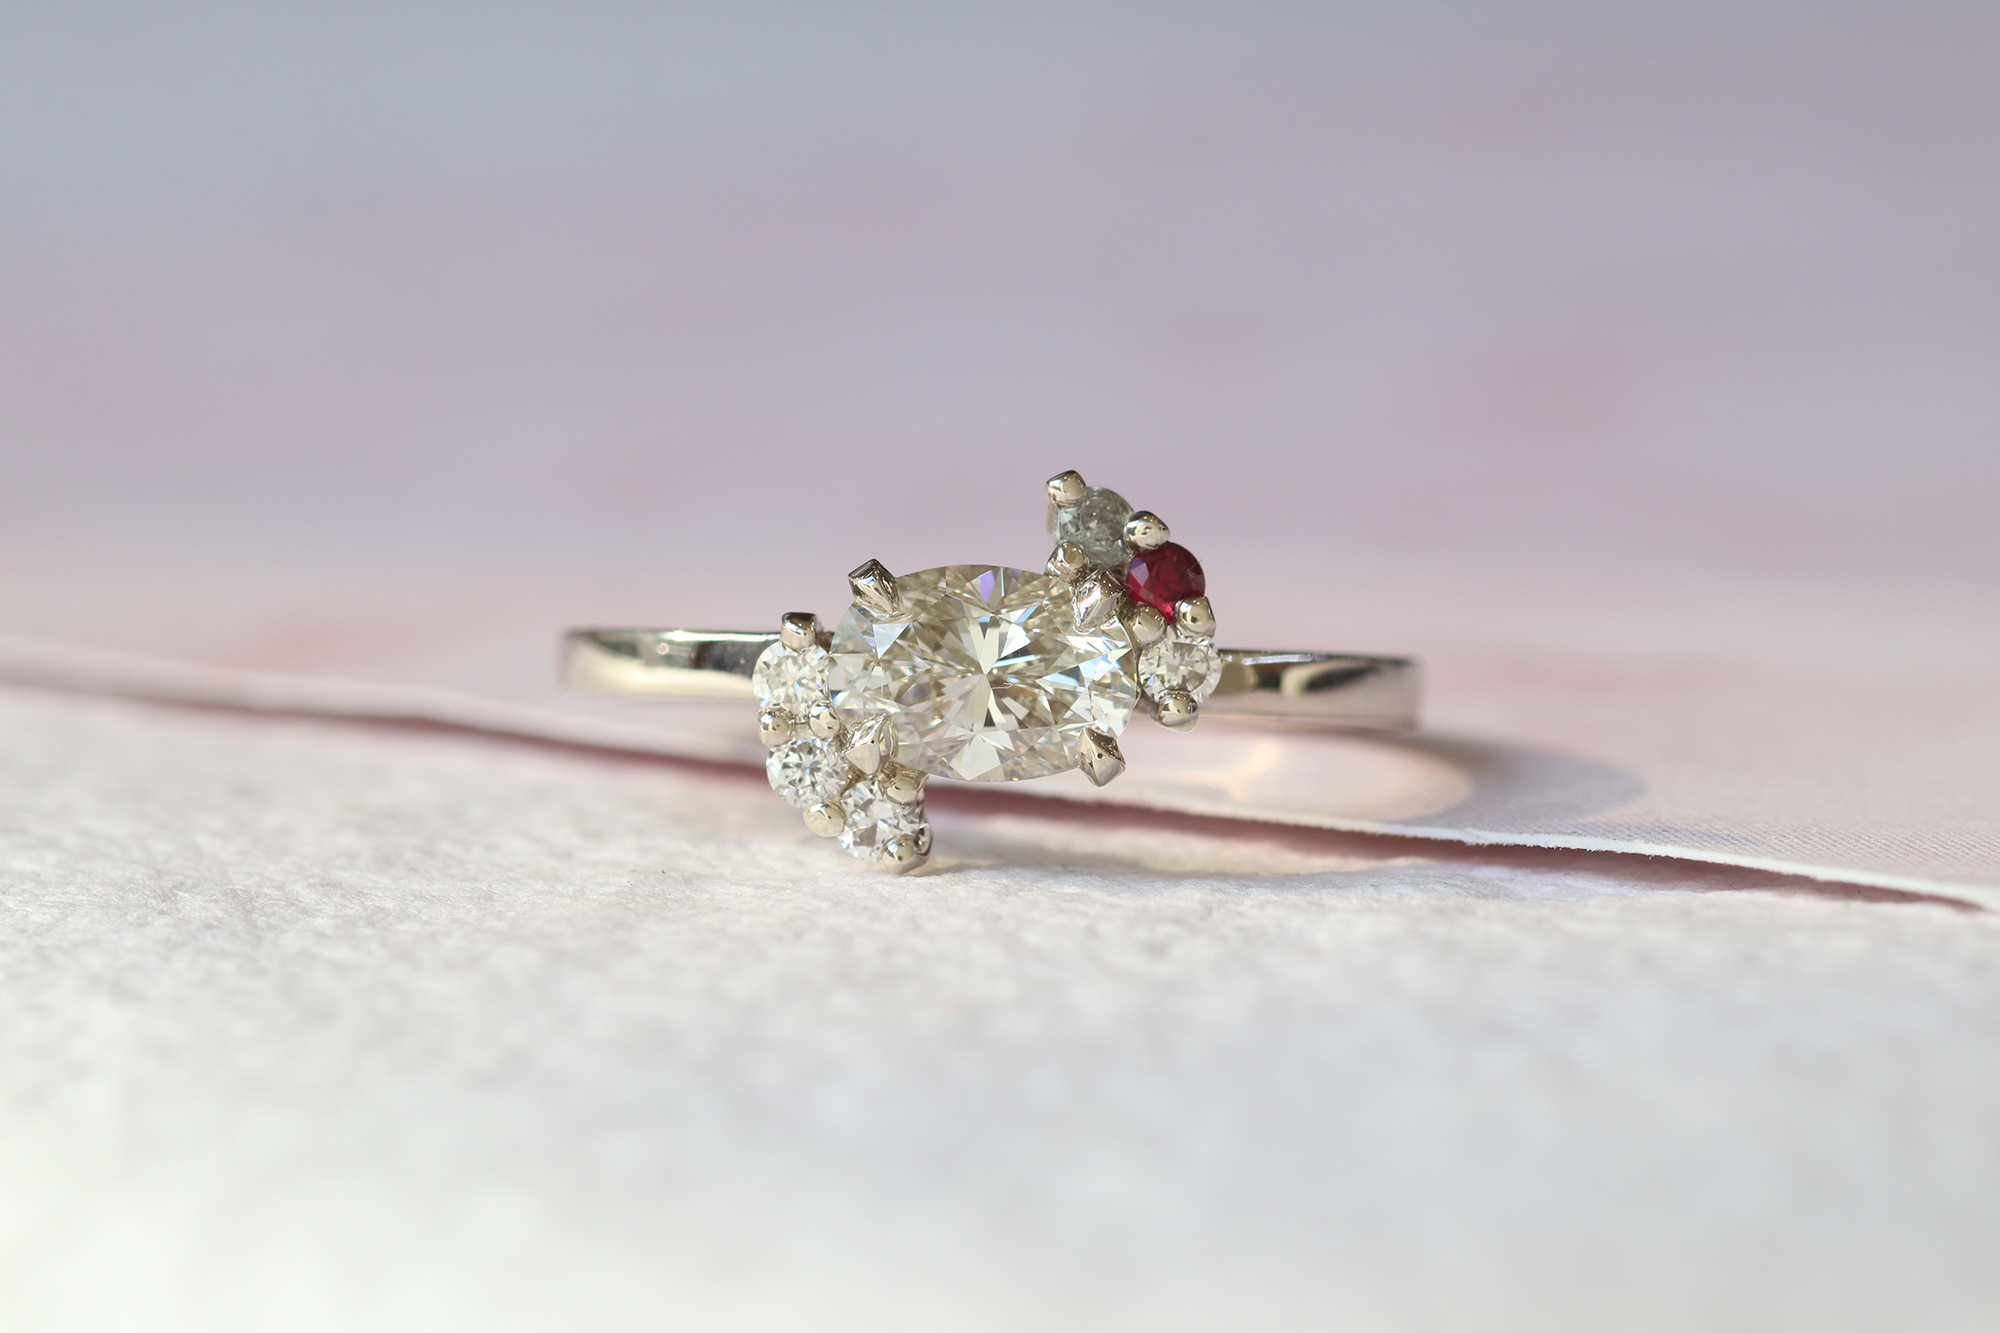 Custom engagement ring featuring a center white diamond and cluster of white diamonds, salt and pepper diamonds, and a red ruby on the platinum band.